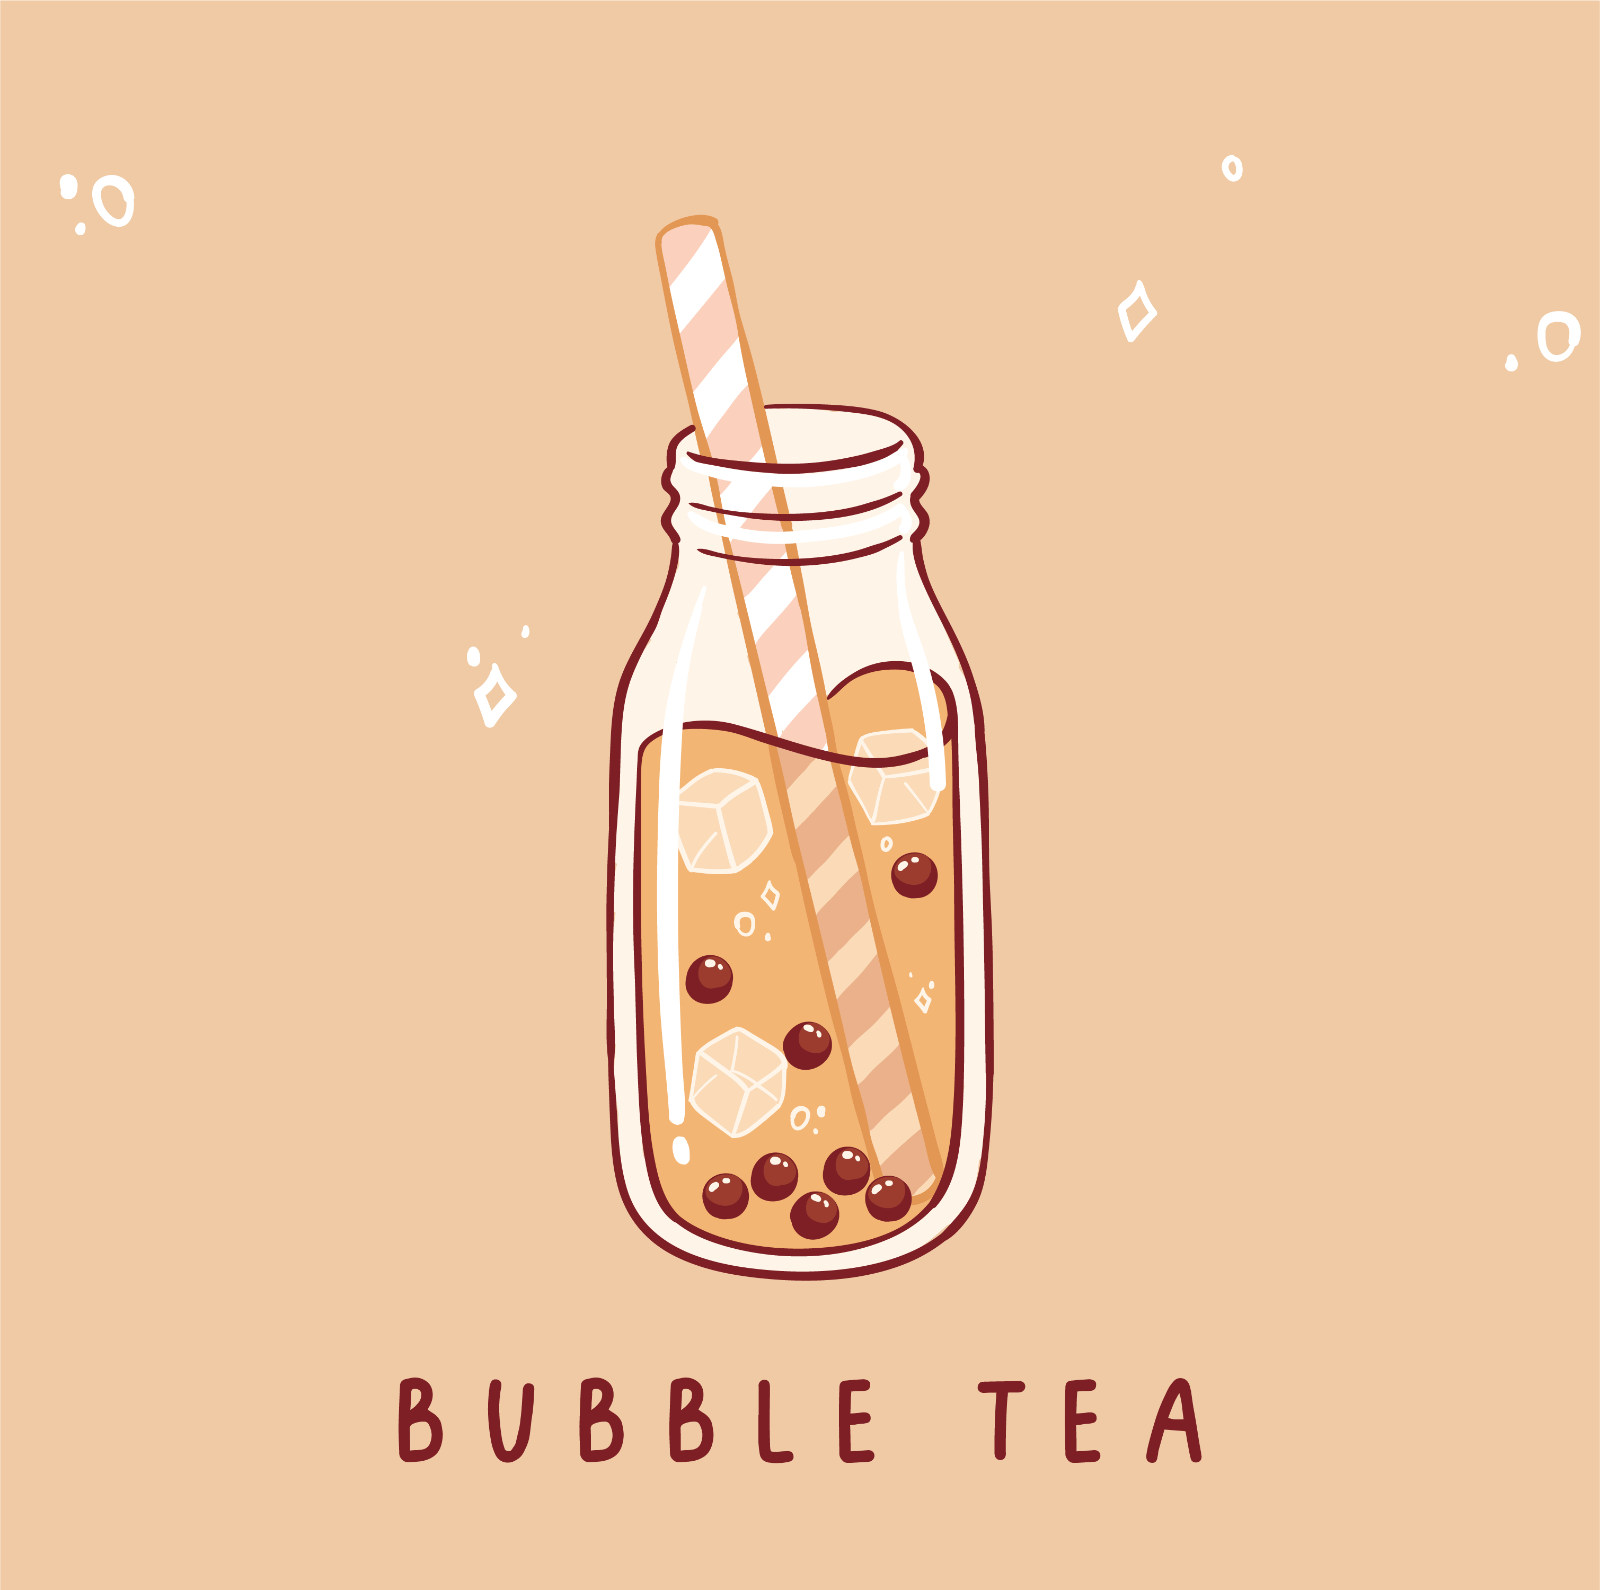 A bubble tea drink in an illustrated glass - Boba